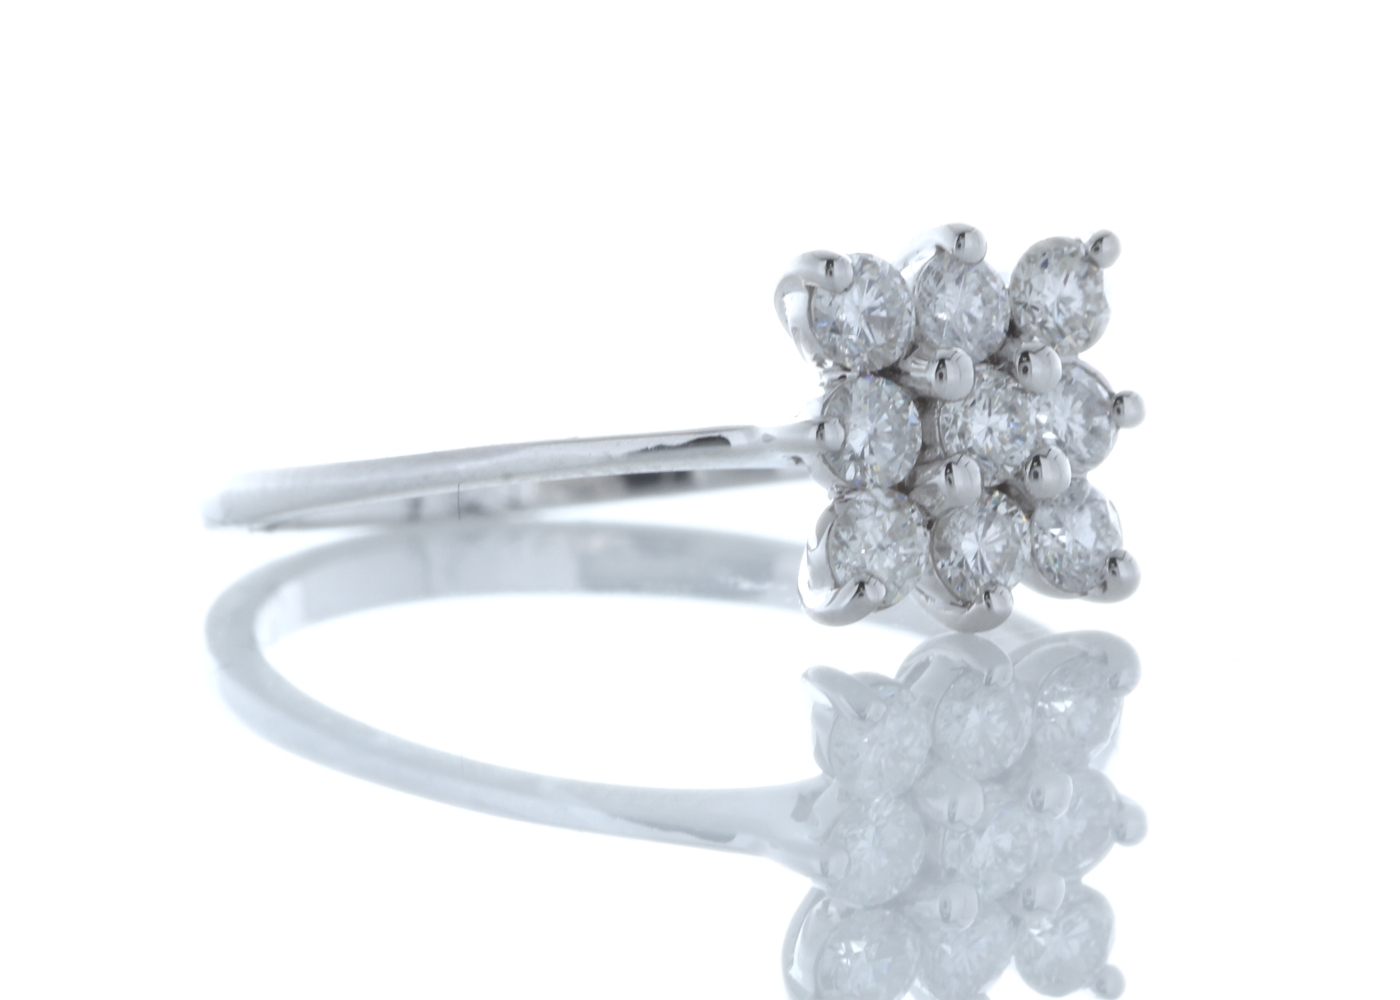 18k White Gold Fancy Cluster Diamond Ring 0.45 Carats - Image 4 of 4